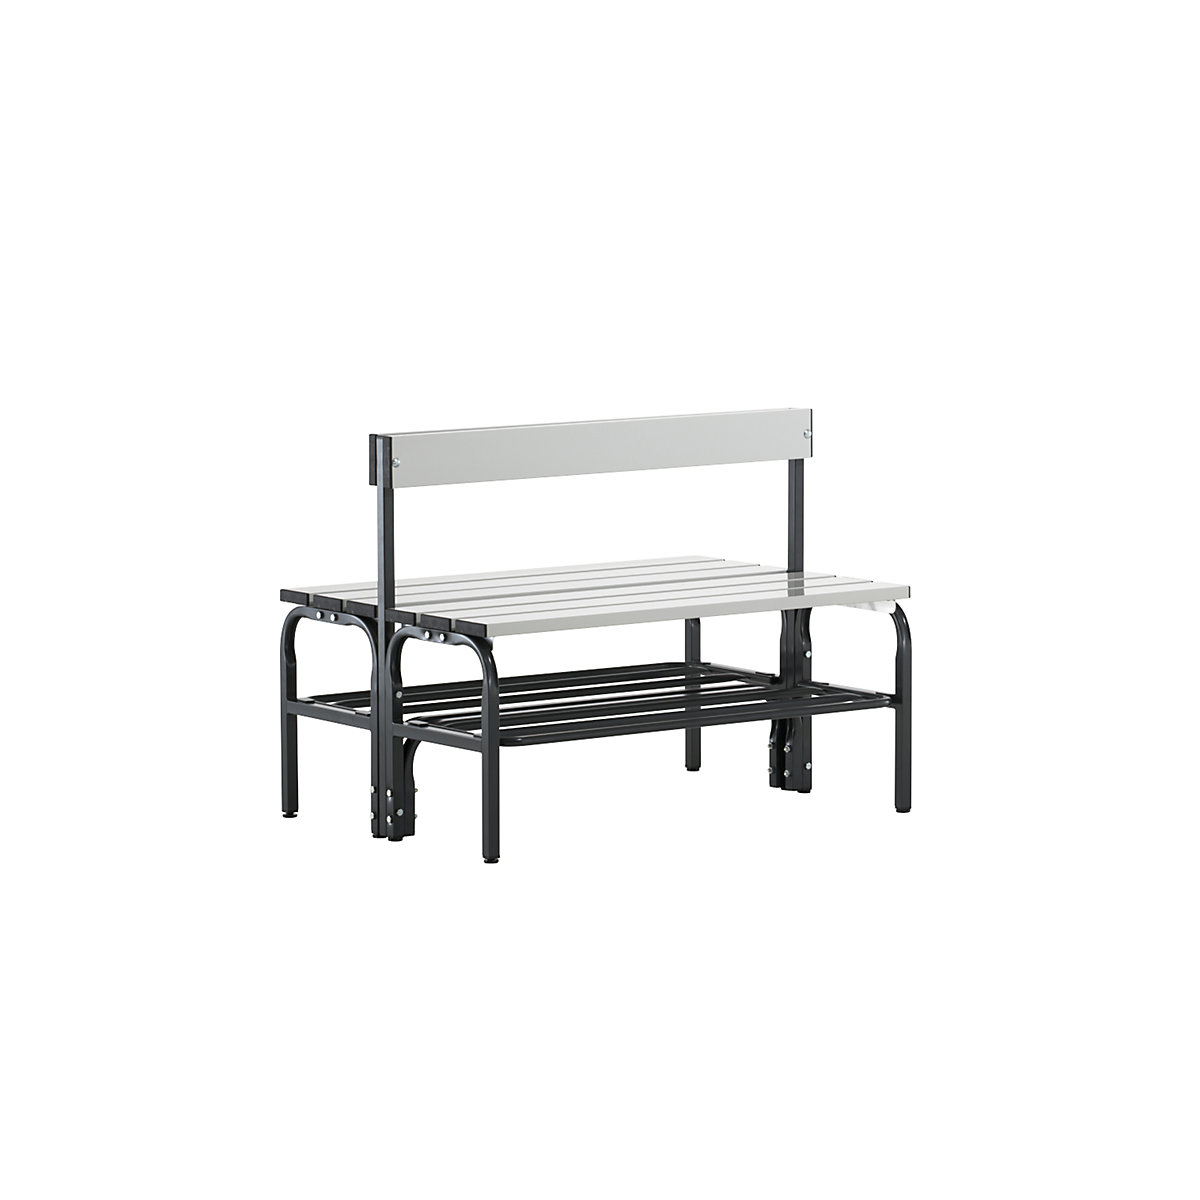 Sypro – Half height cloakroom bench with back rest, double sided, aluminium, length 1015 mm, charcoal, shoe rack